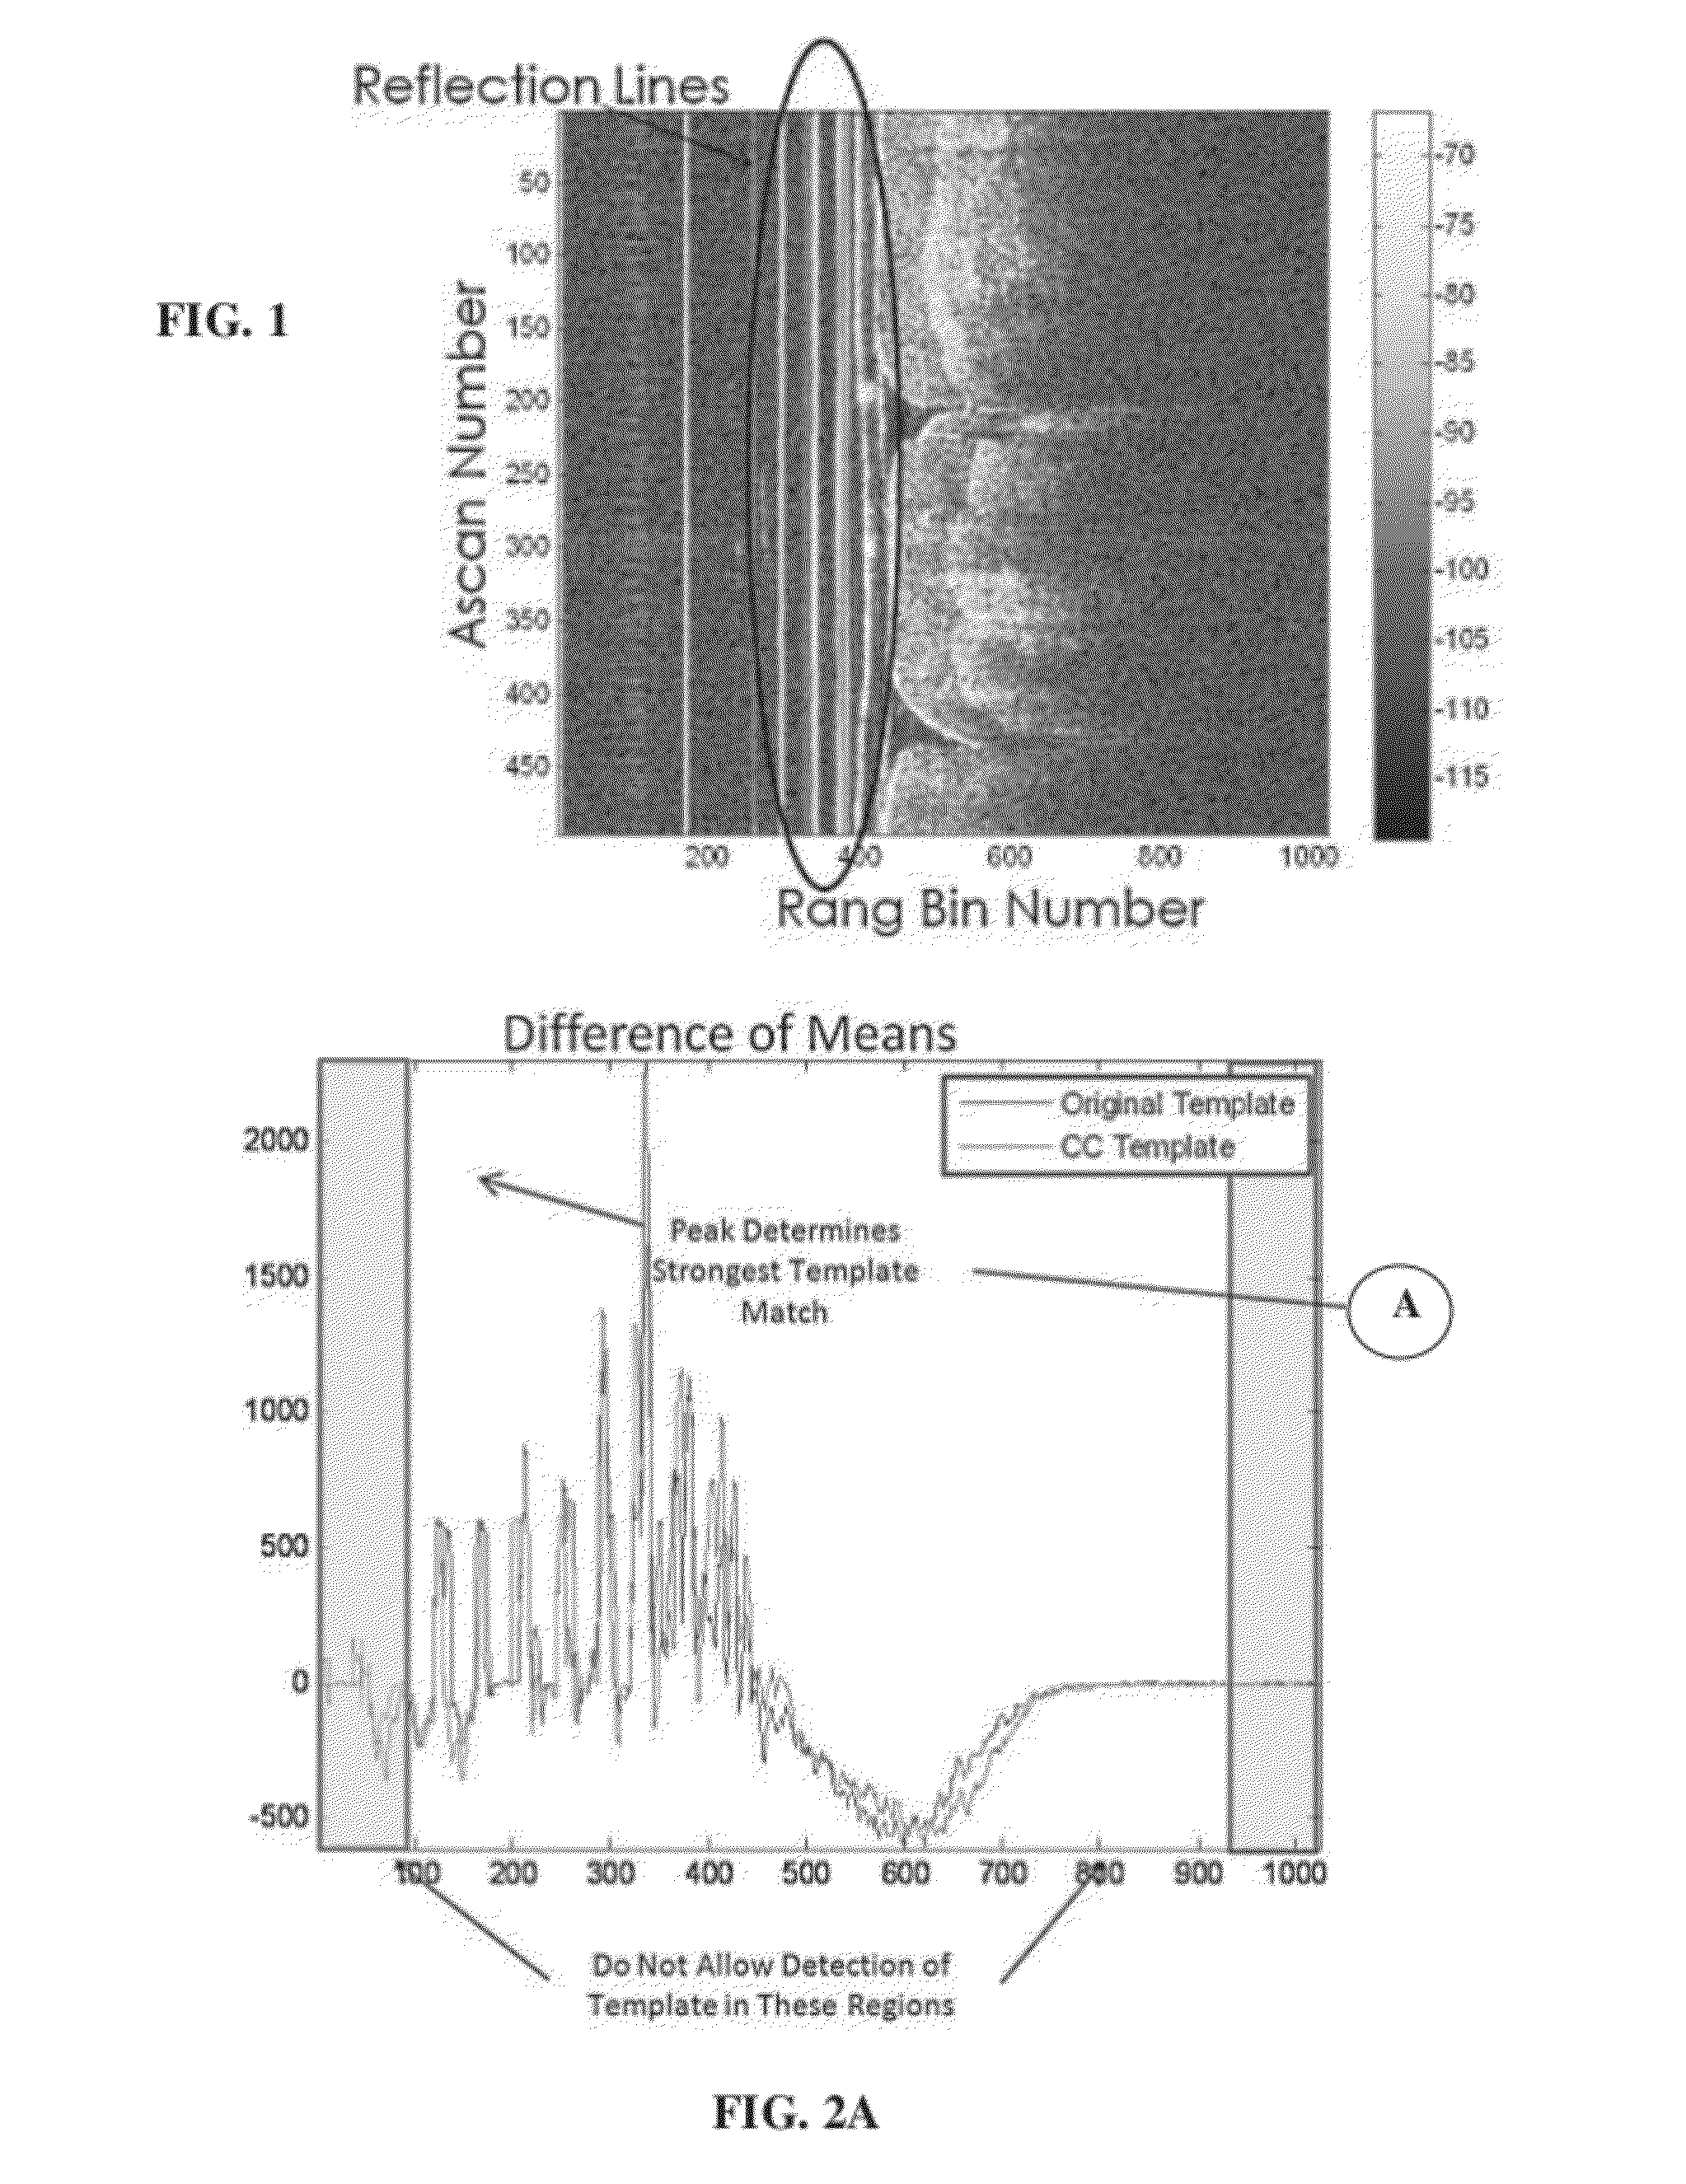 Automatic calibration systems and methods of use